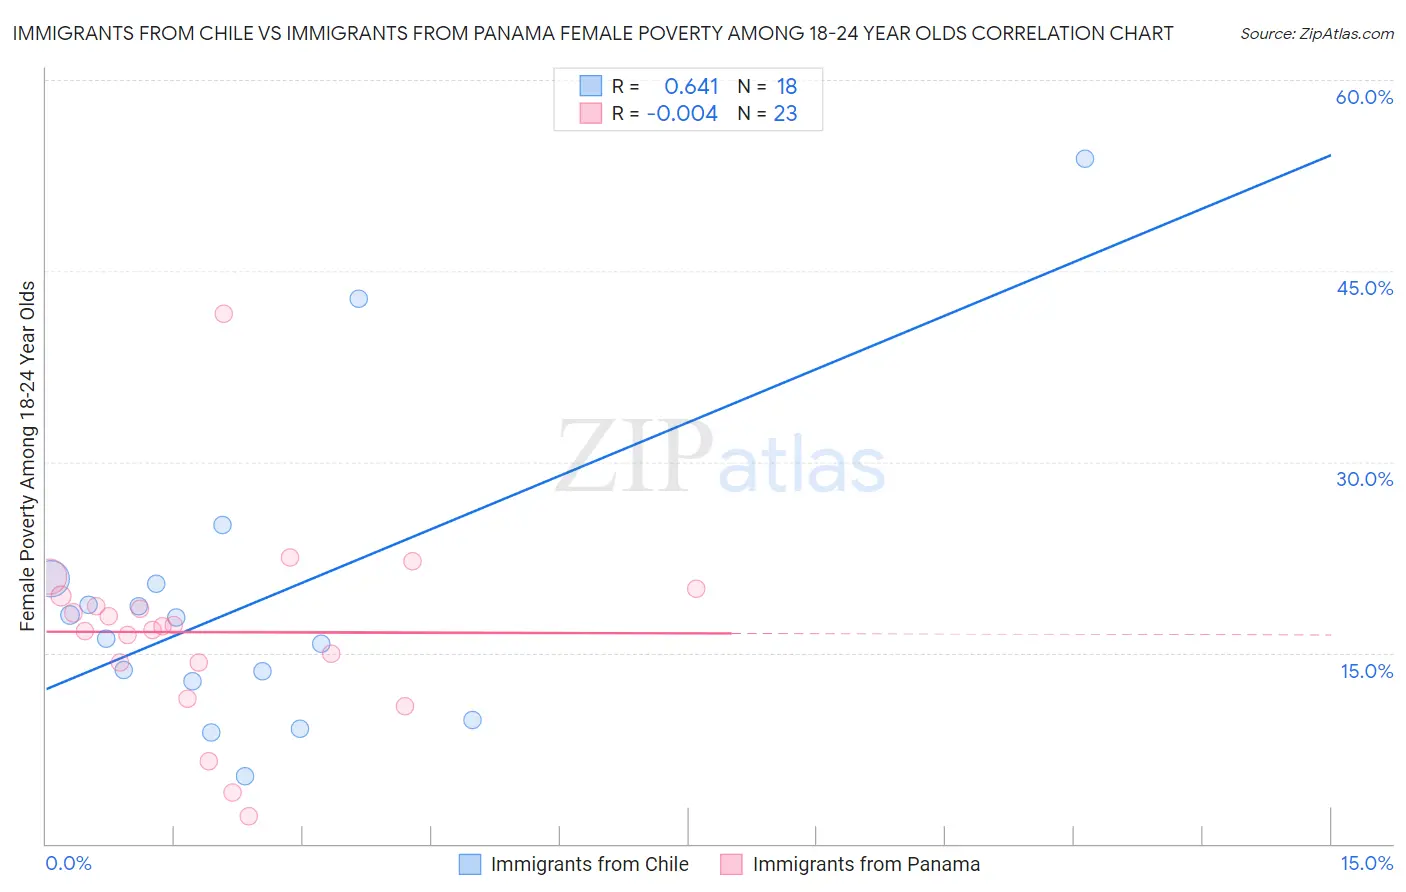 Immigrants from Chile vs Immigrants from Panama Female Poverty Among 18-24 Year Olds